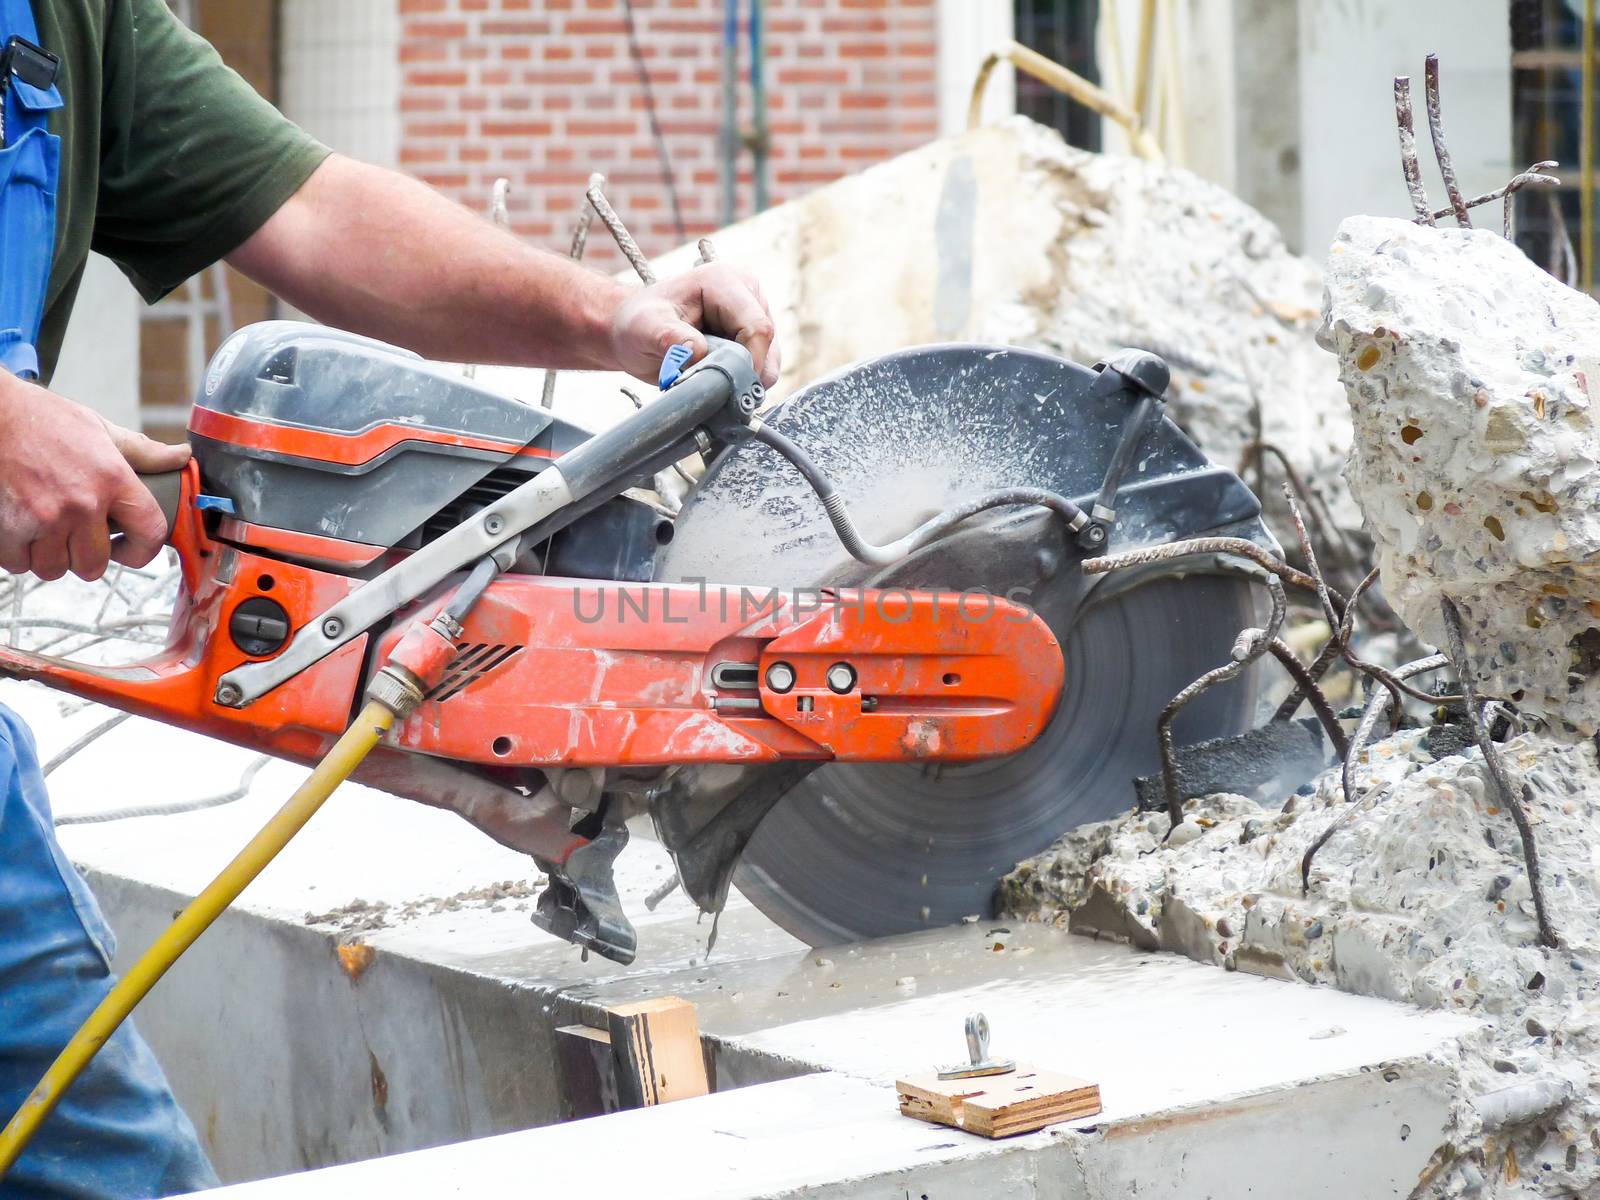 Arms with grinder cutting concrete by BenSchonewille